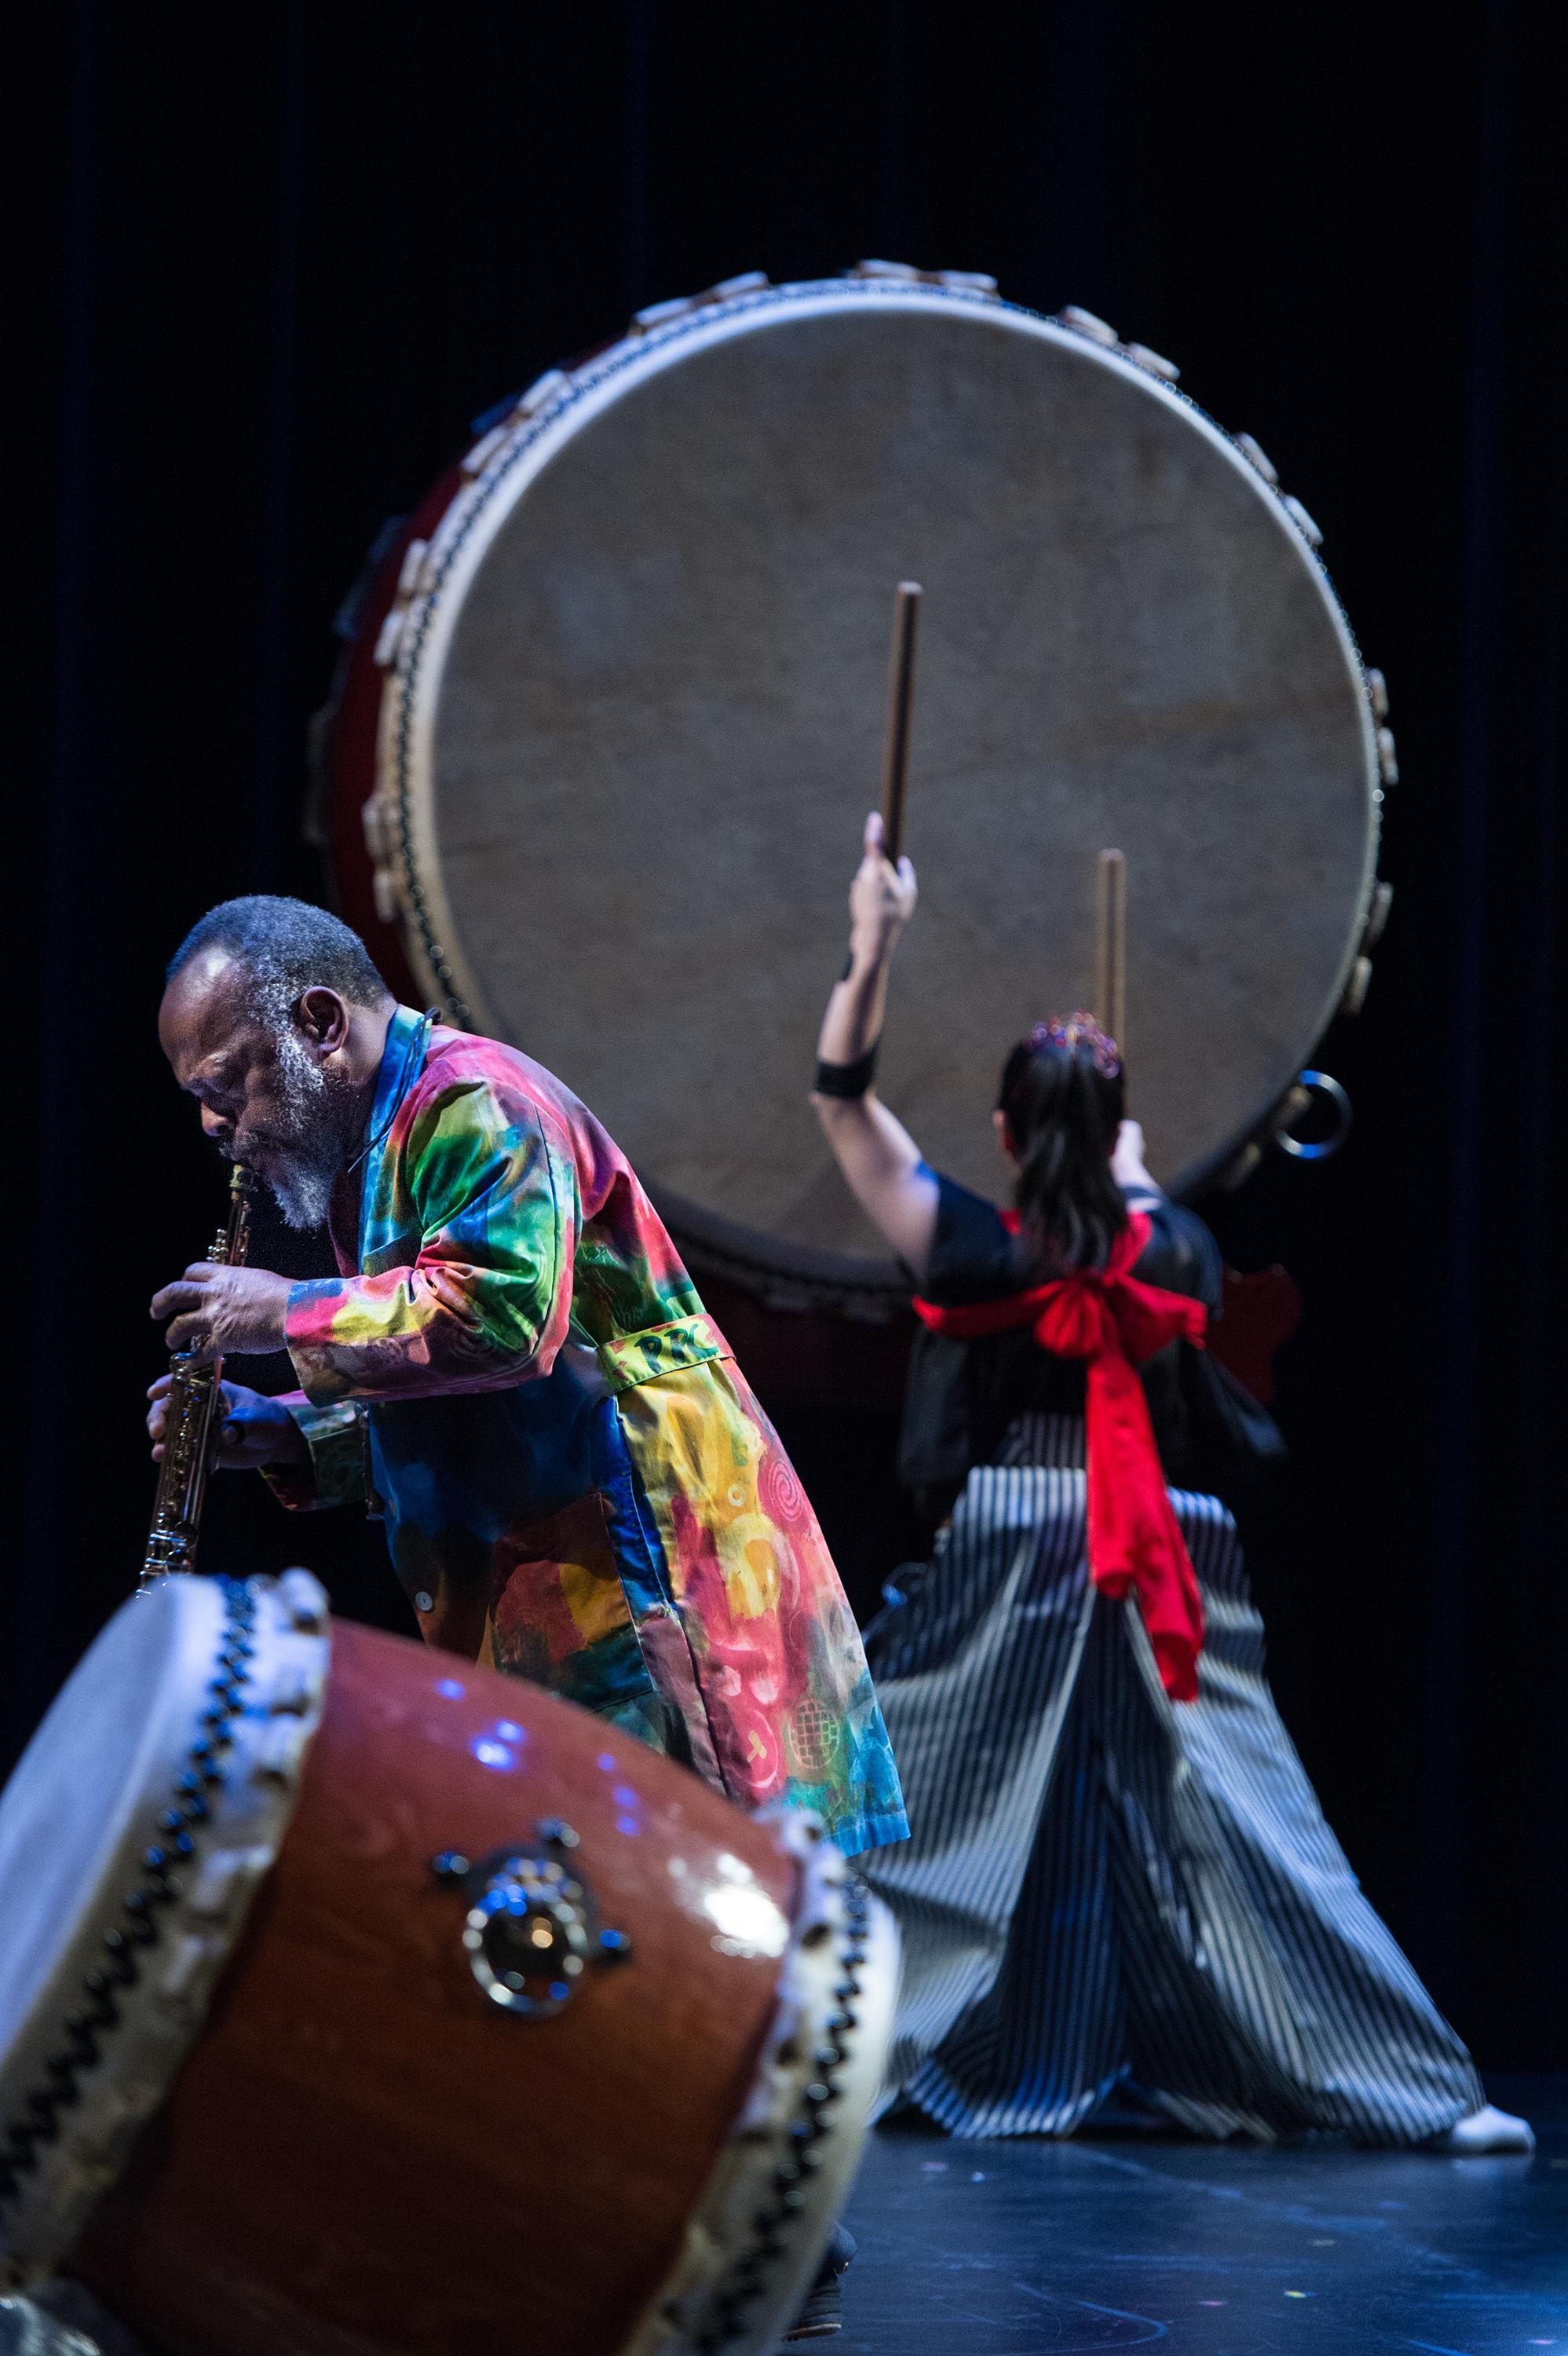 A man plays a soprano saxophone on stage while a woman beats an enormous taiko drum in the background.